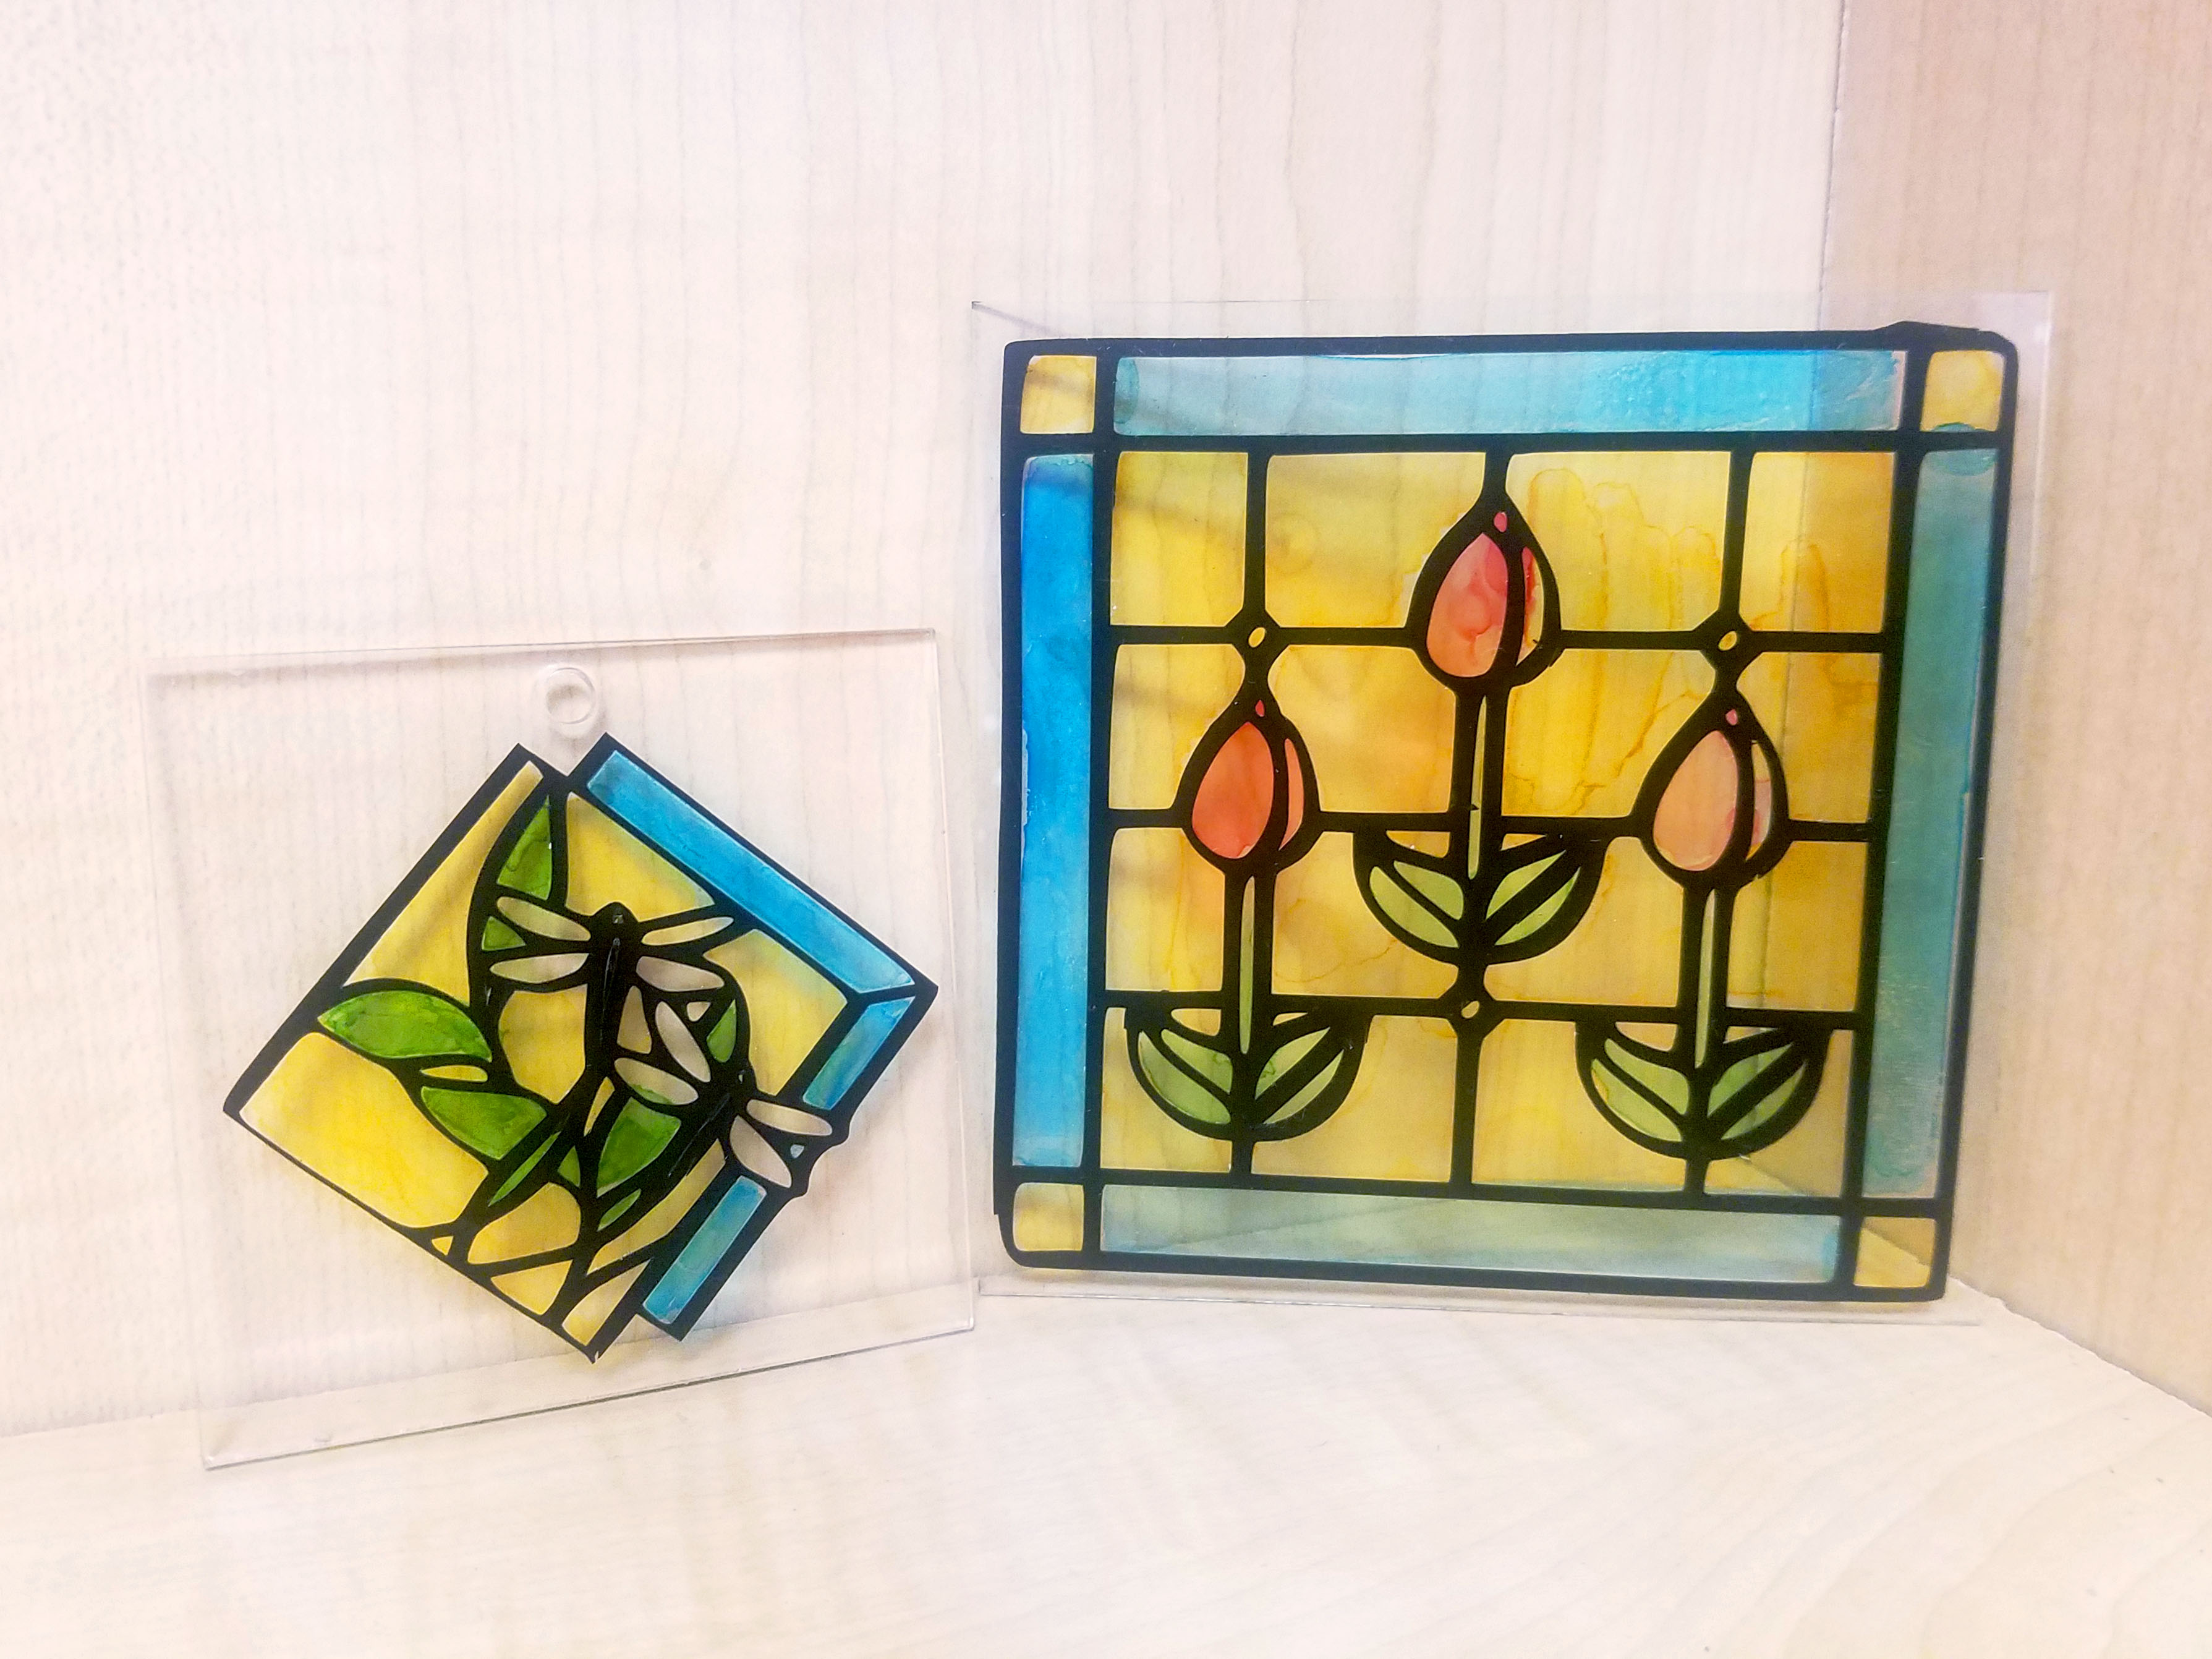 Two faux stained glass projects made with vinyl stickers and artist markers